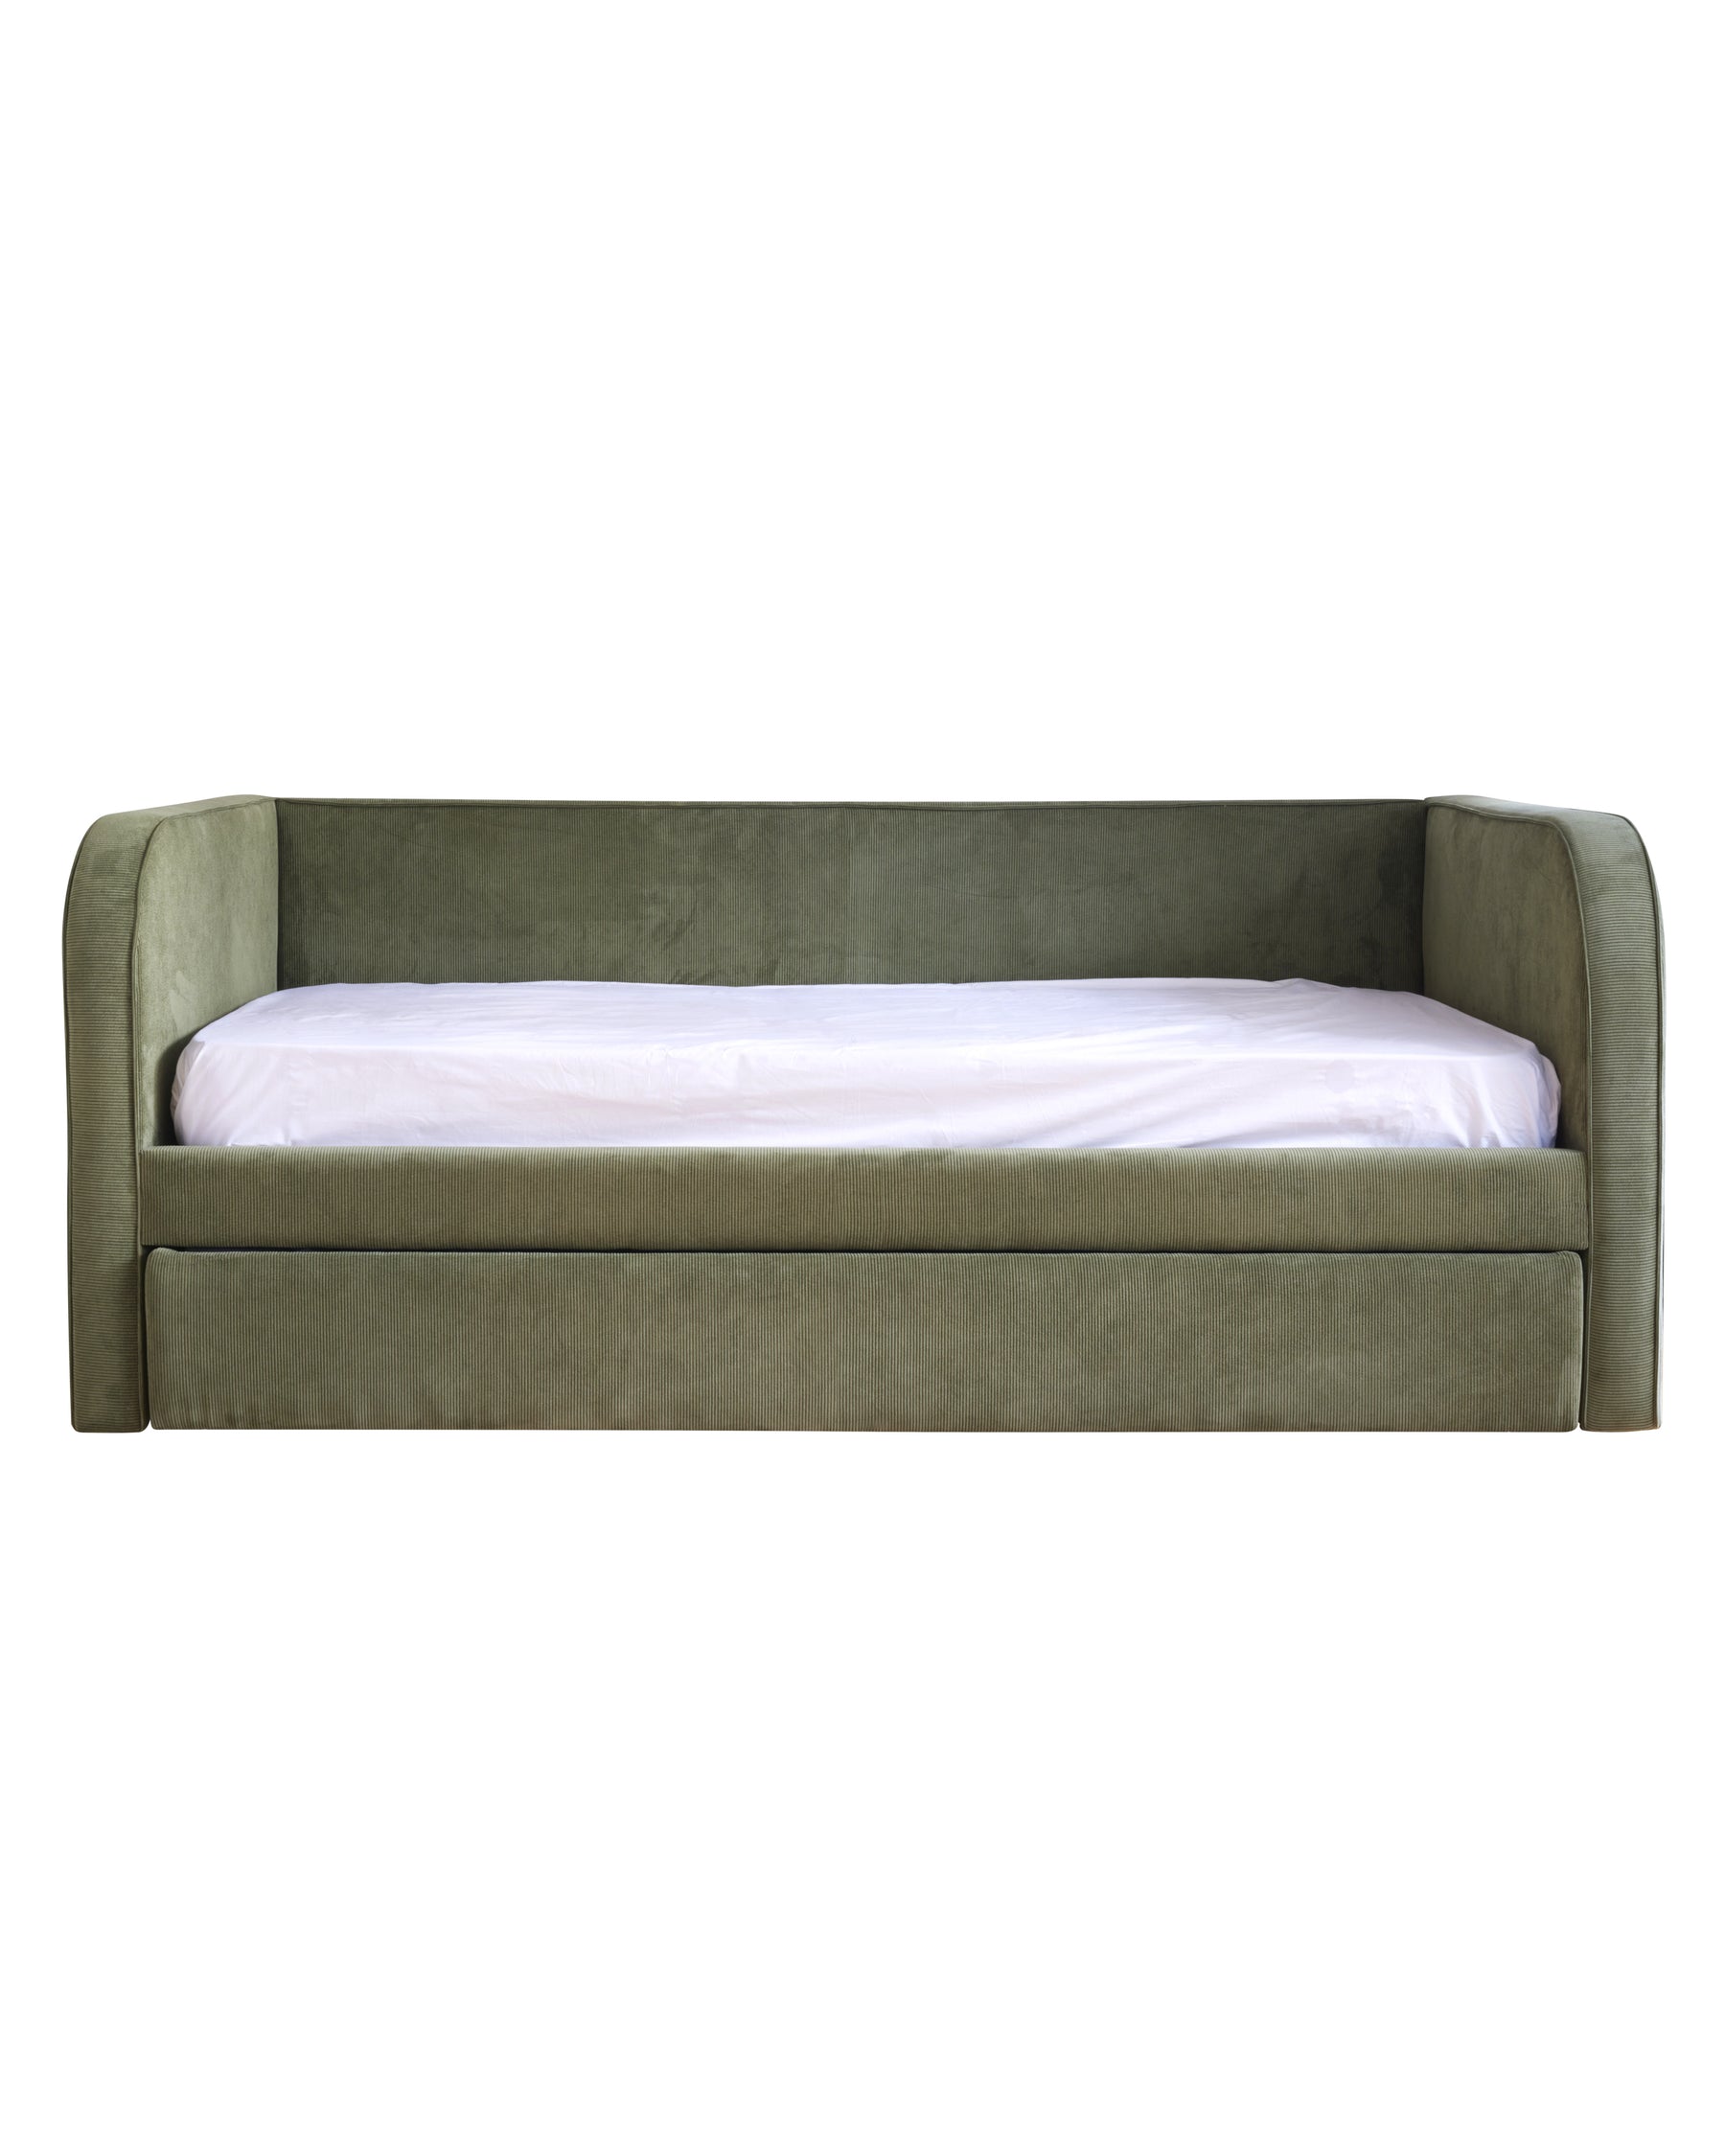 ARCHER UPHOLSTERED DAYBED